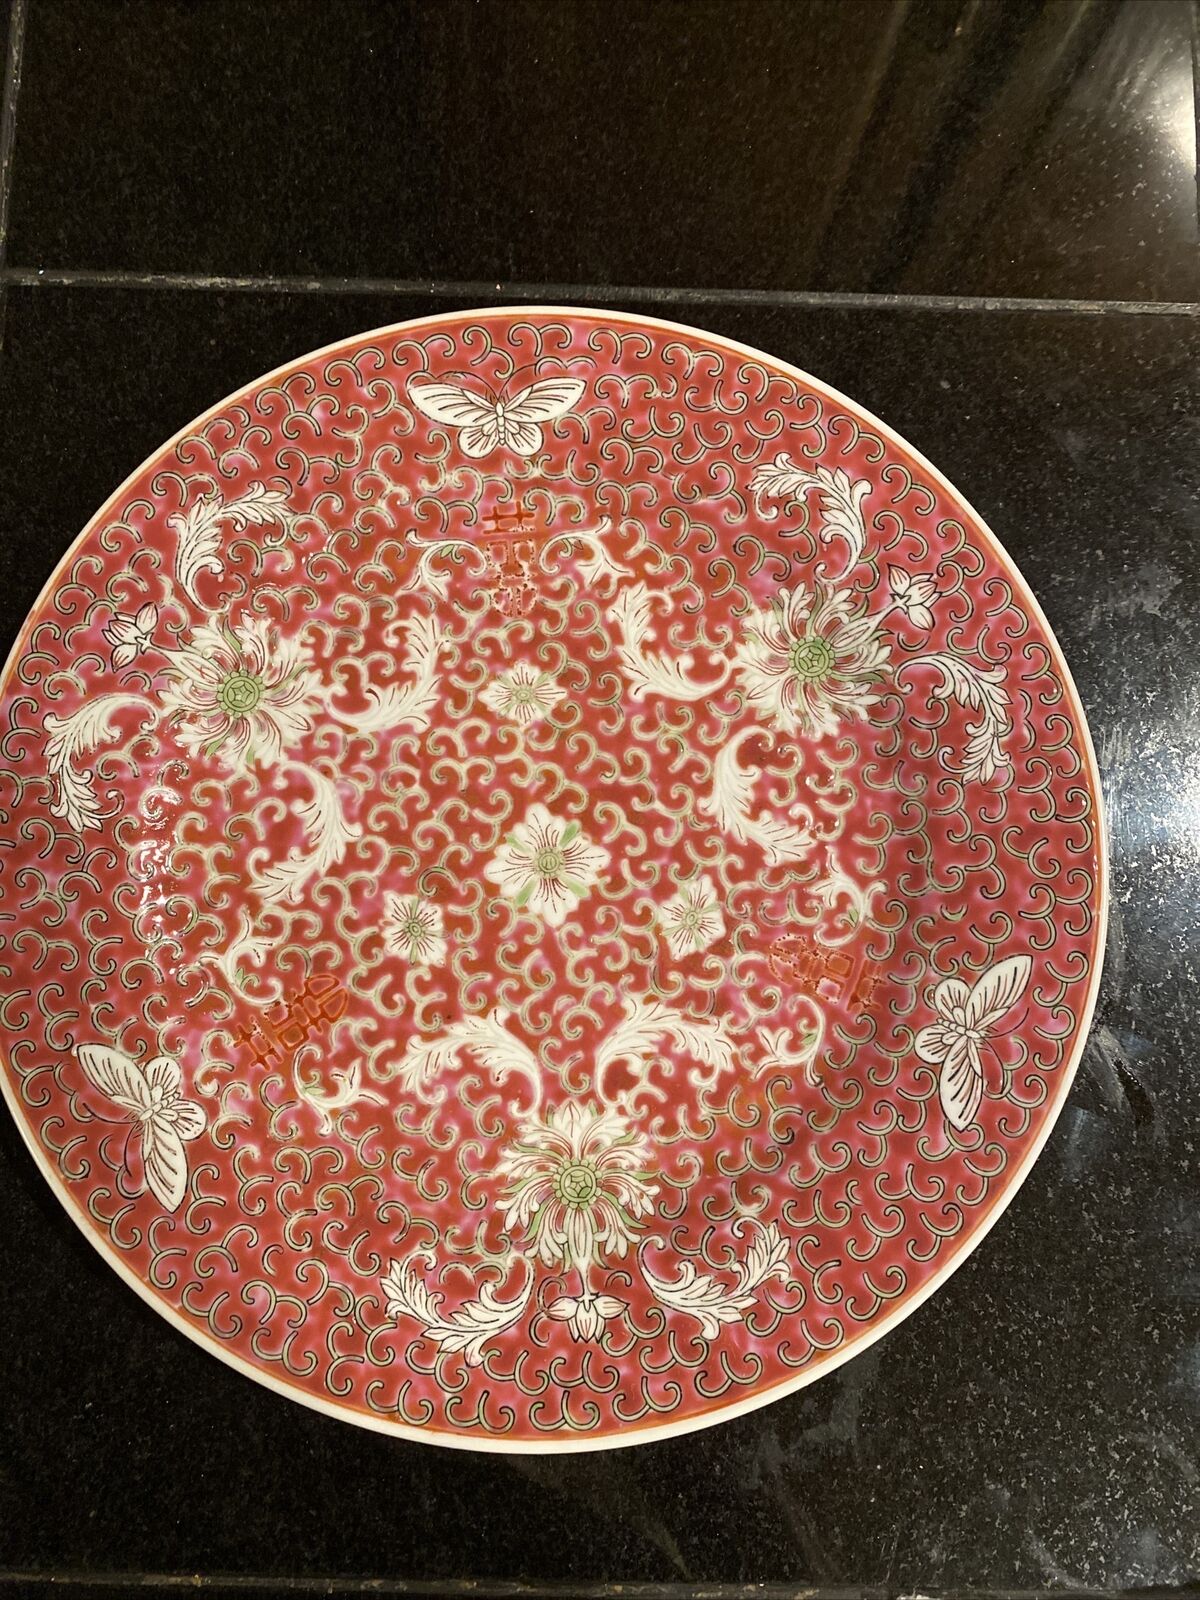 Asian oriental Decorative Plate Textured Floral Red and White with butterflies